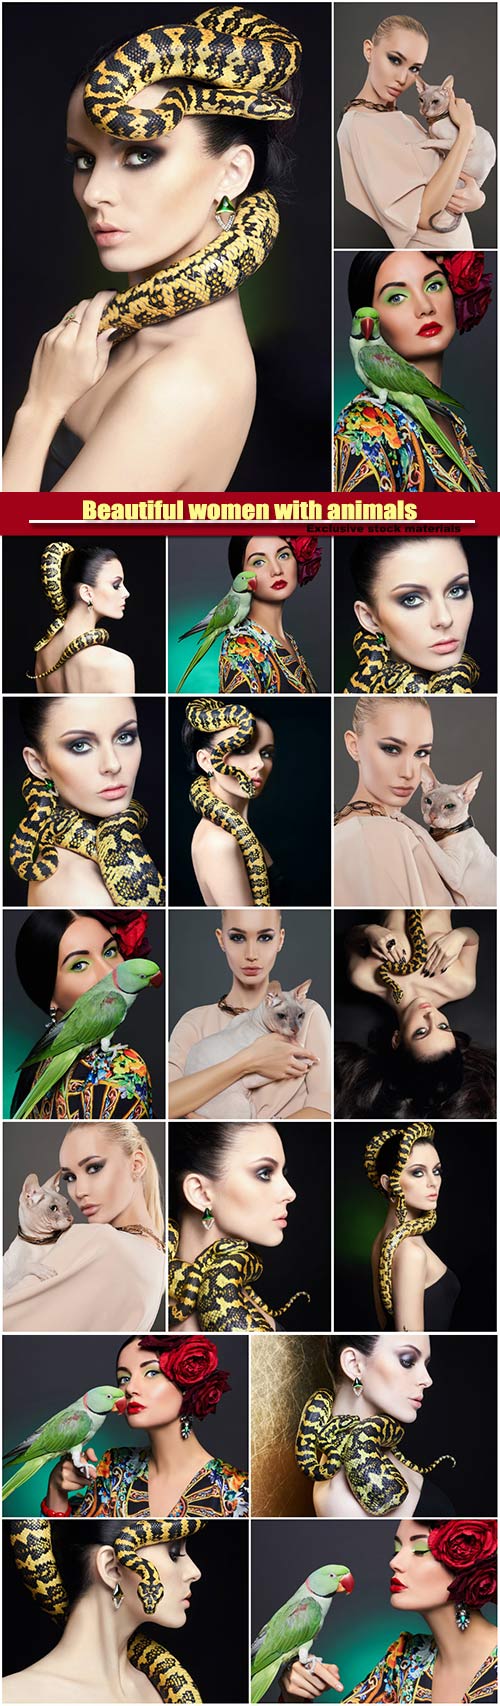 Beautiful women with animals, girl with snake girl with a parrot, girl with cat